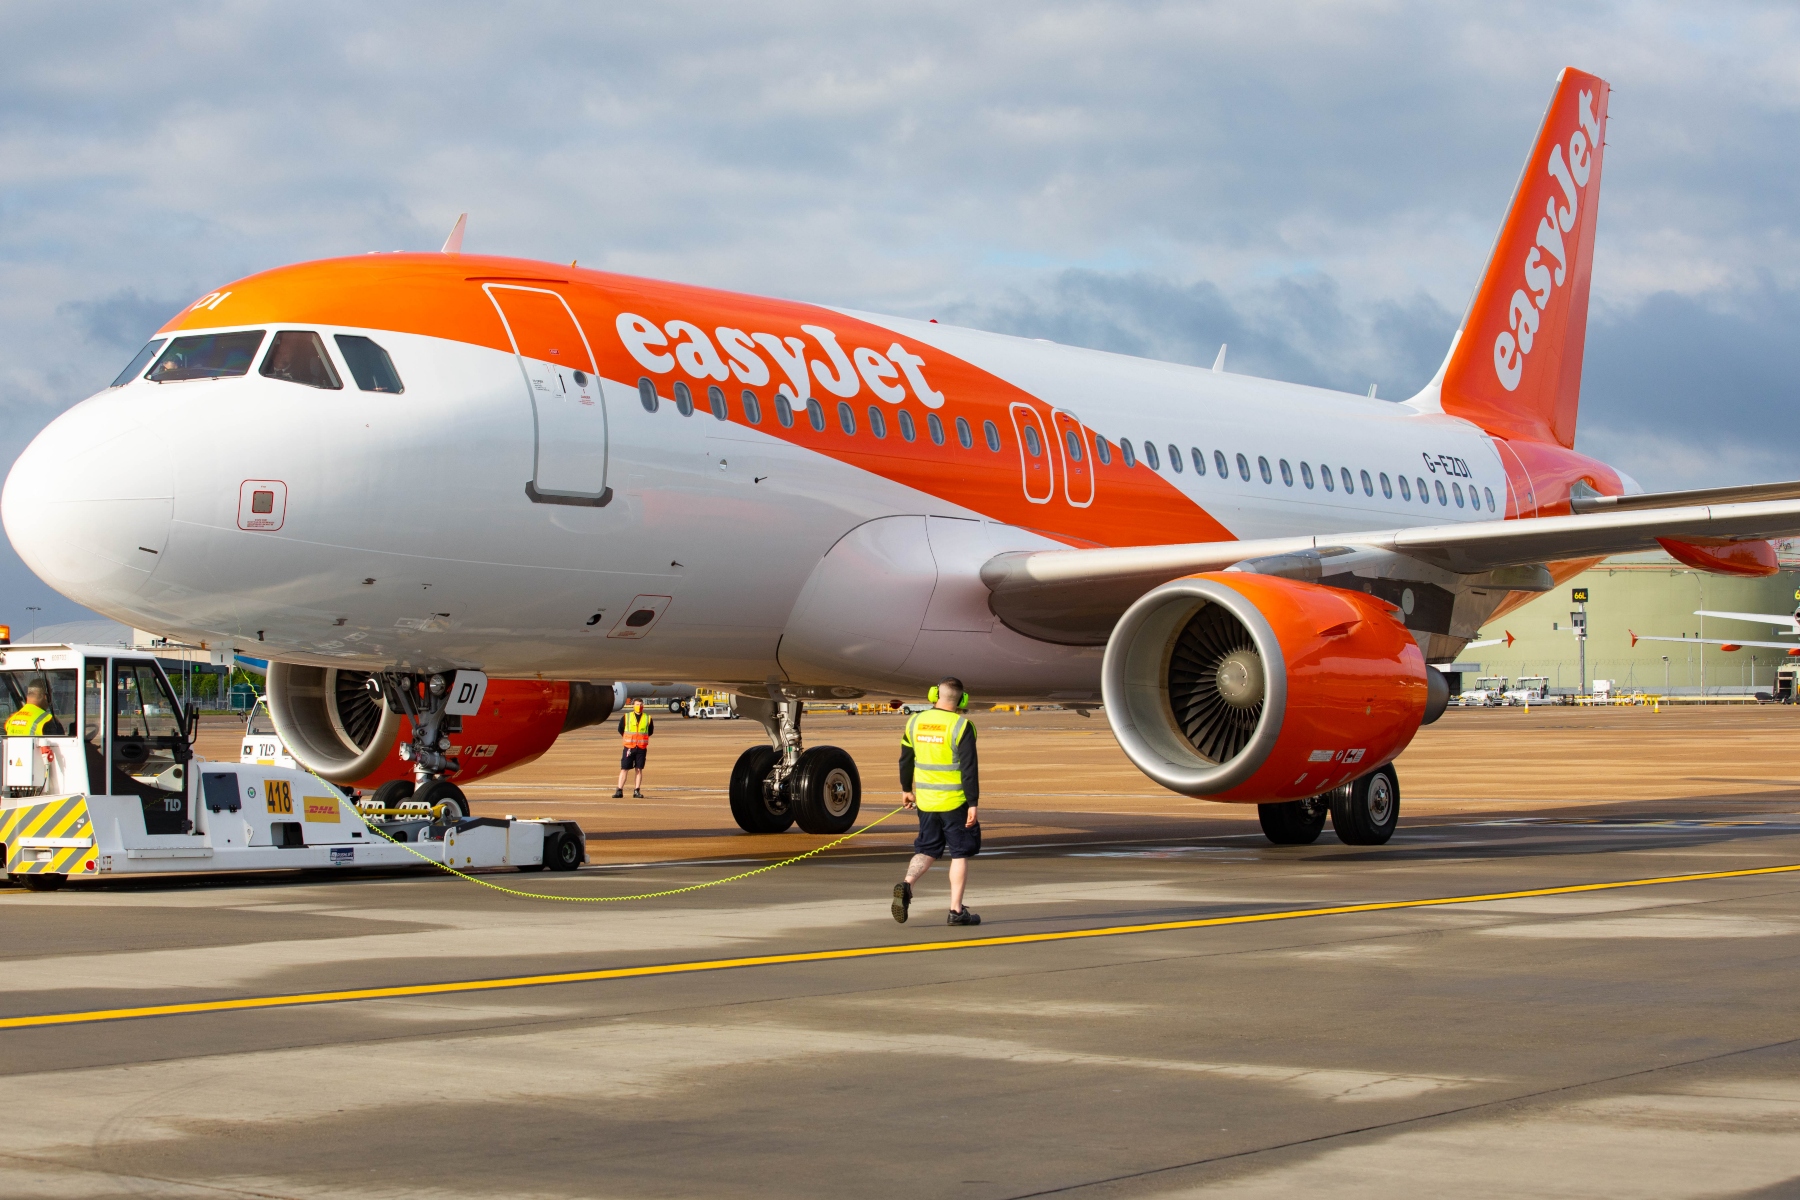 EasyJet 'prepared' for uncertainty surrounding travel amid Omicron Covid variant